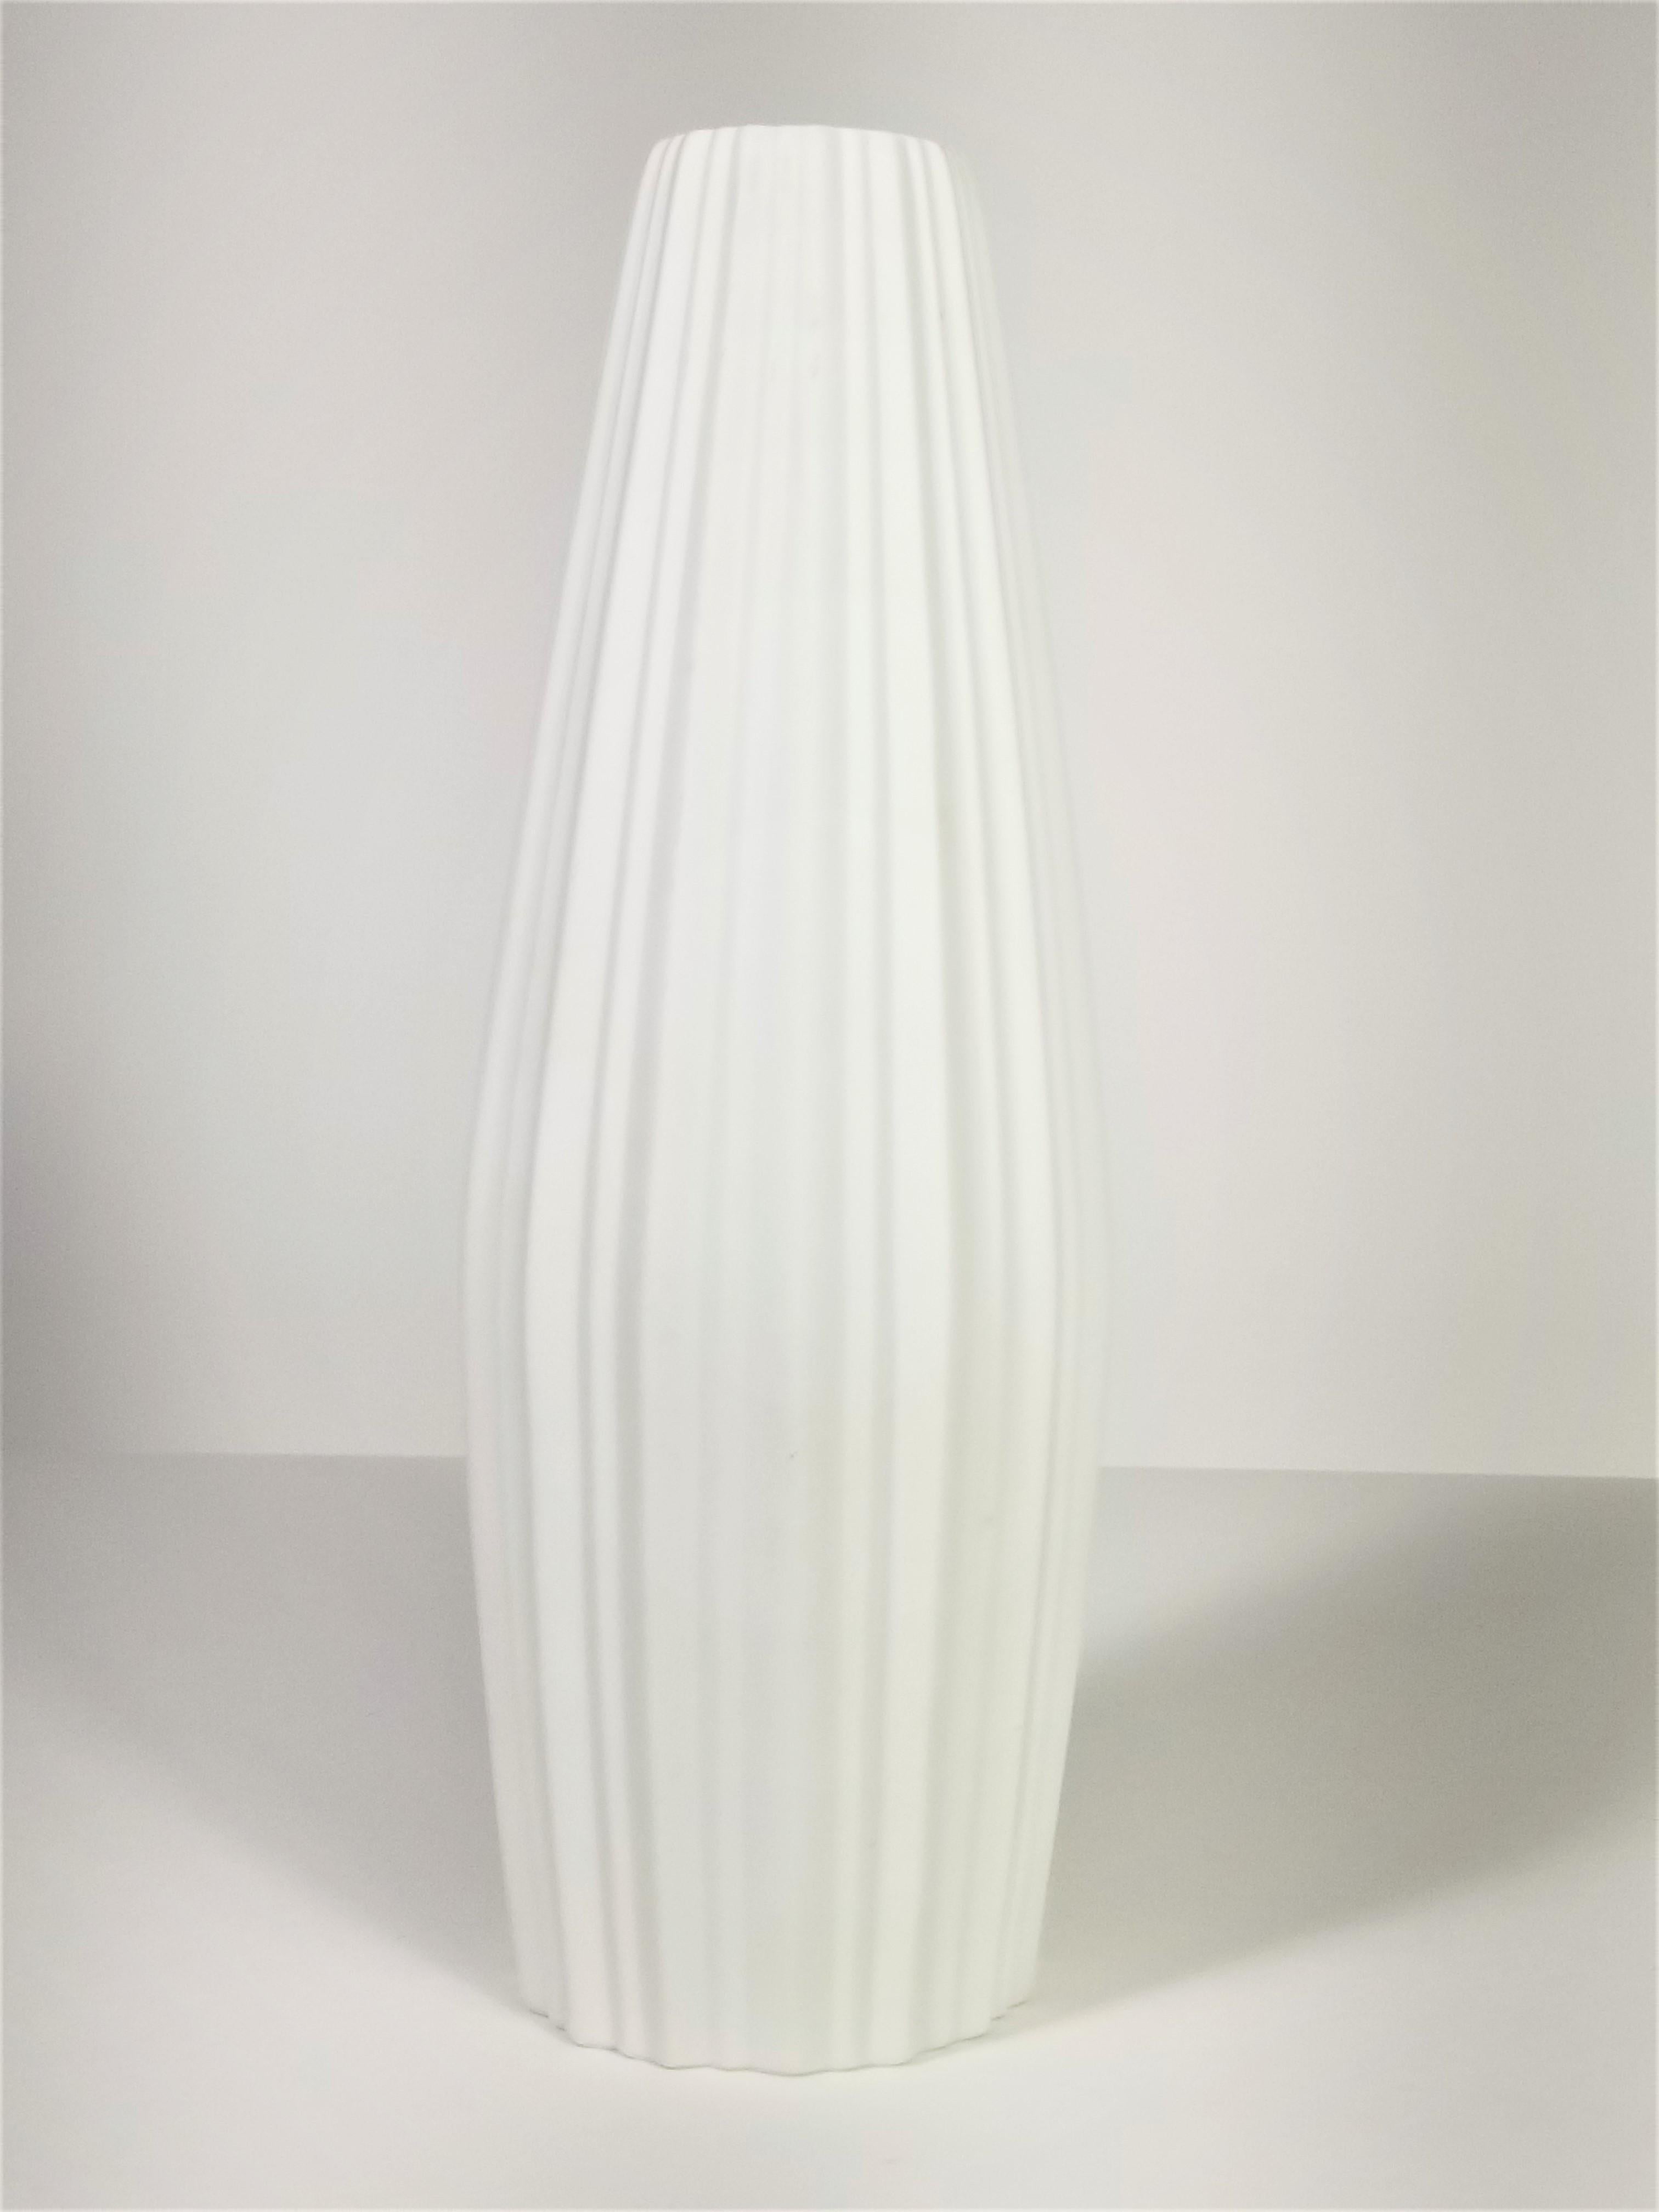 Heinrich  West Germany  Selb 1960's Dull Biscuit Porcelain Precious White Vase